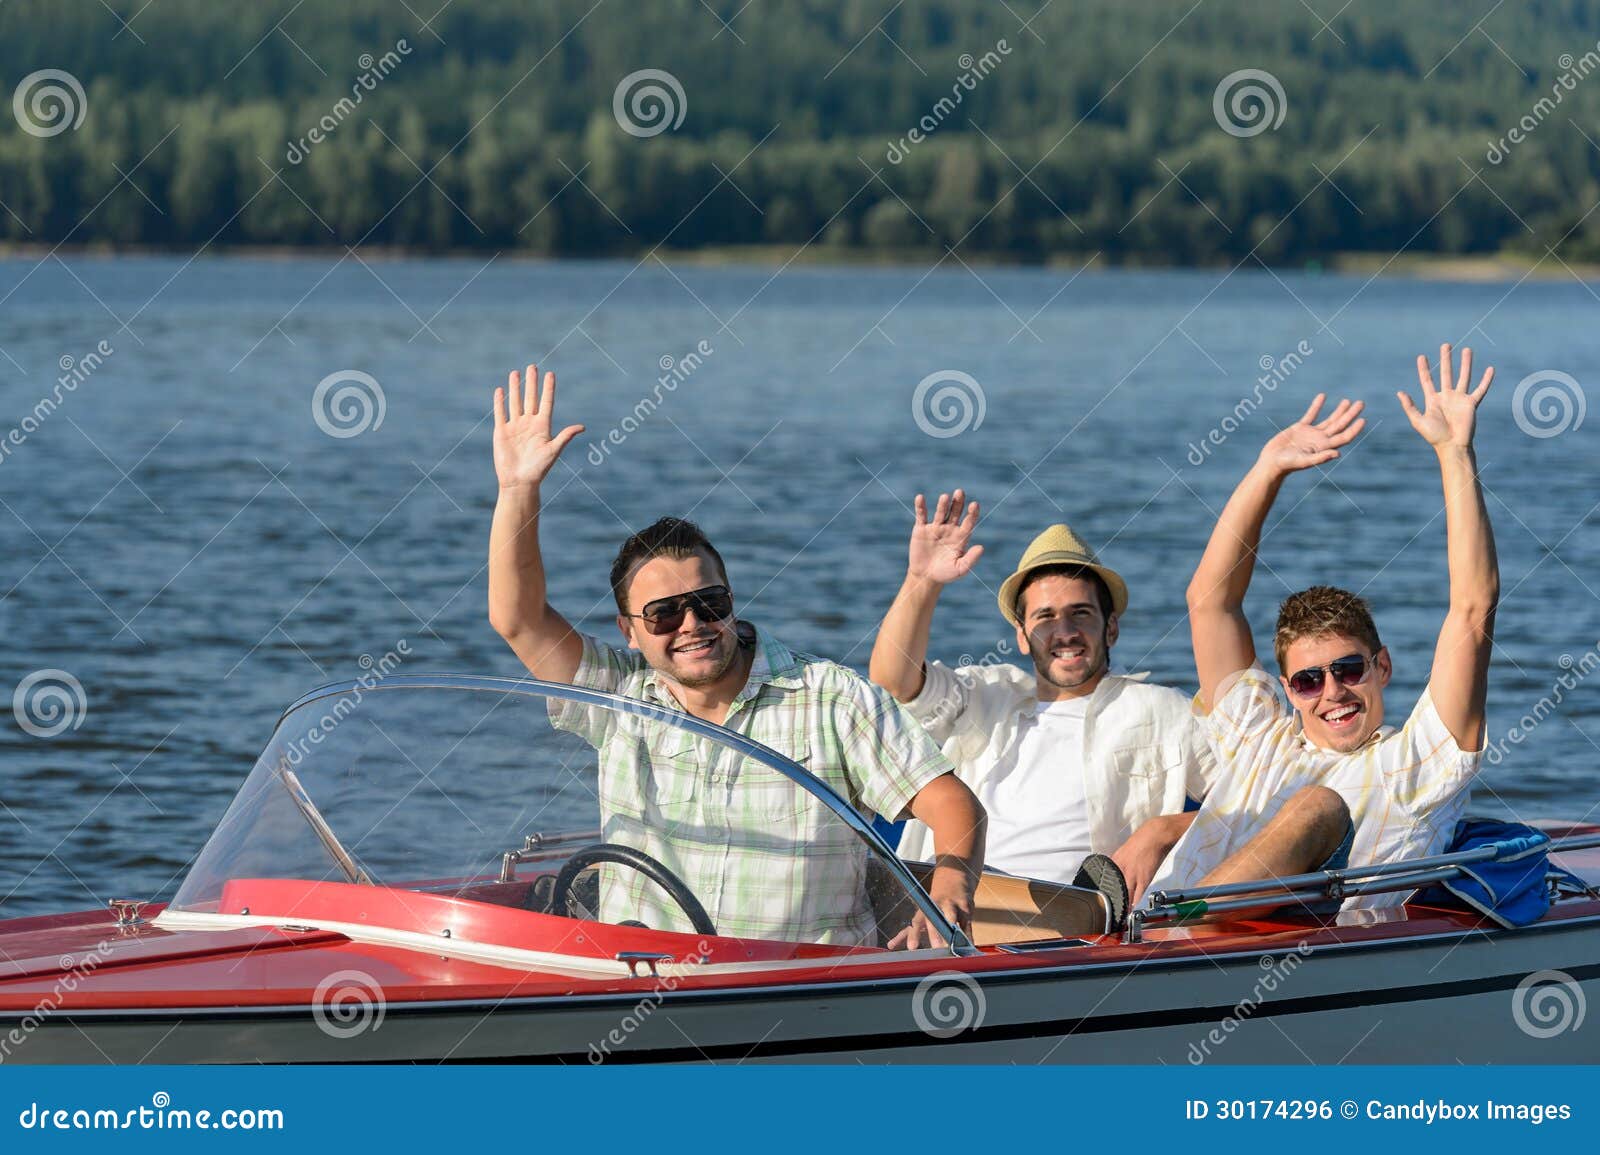 cheerful young guys partying in speed boat